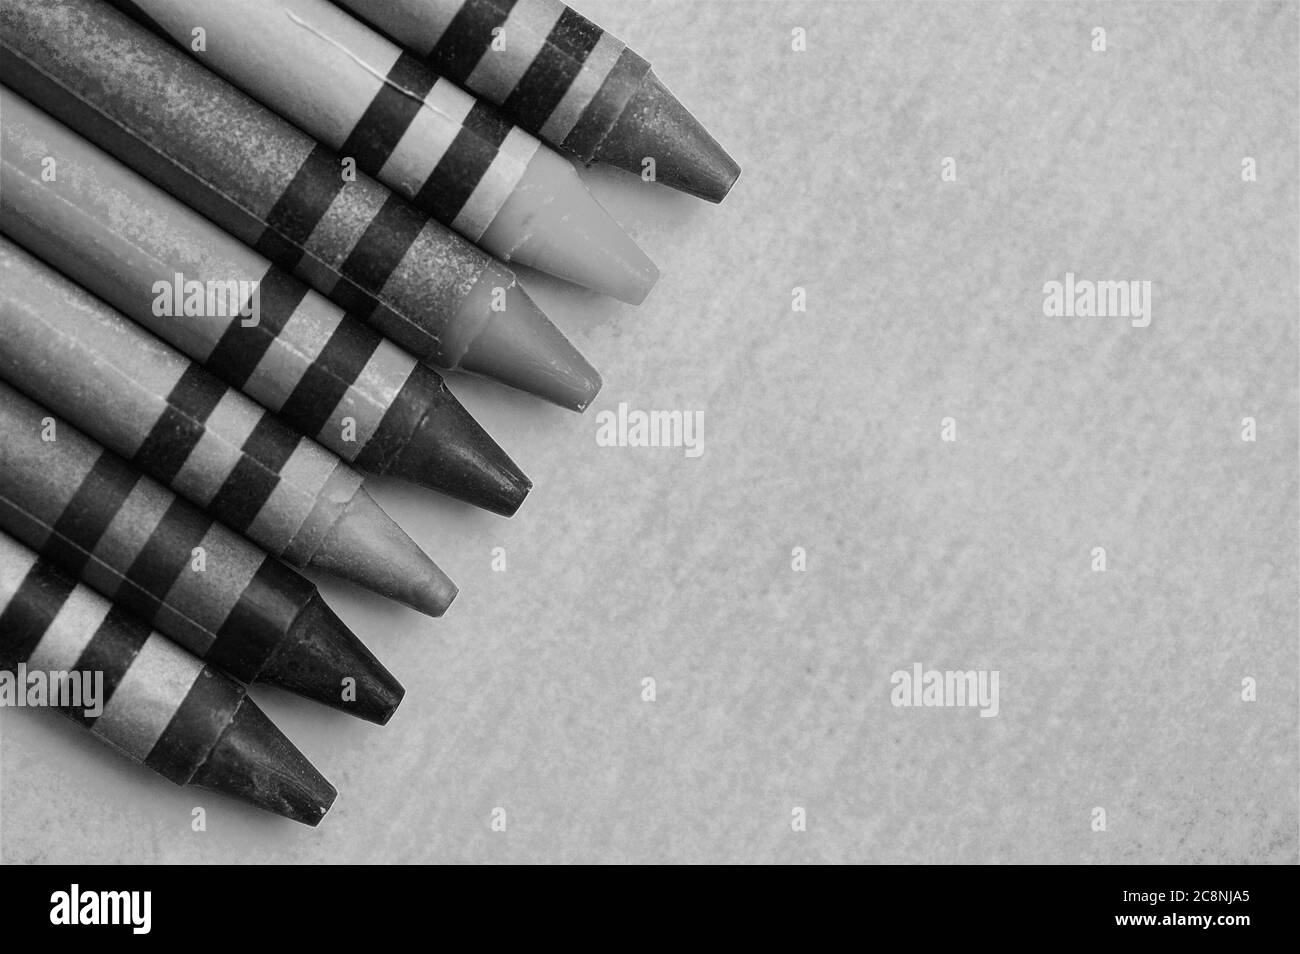 Wax crayons white background Black and White Stock Photos & Images